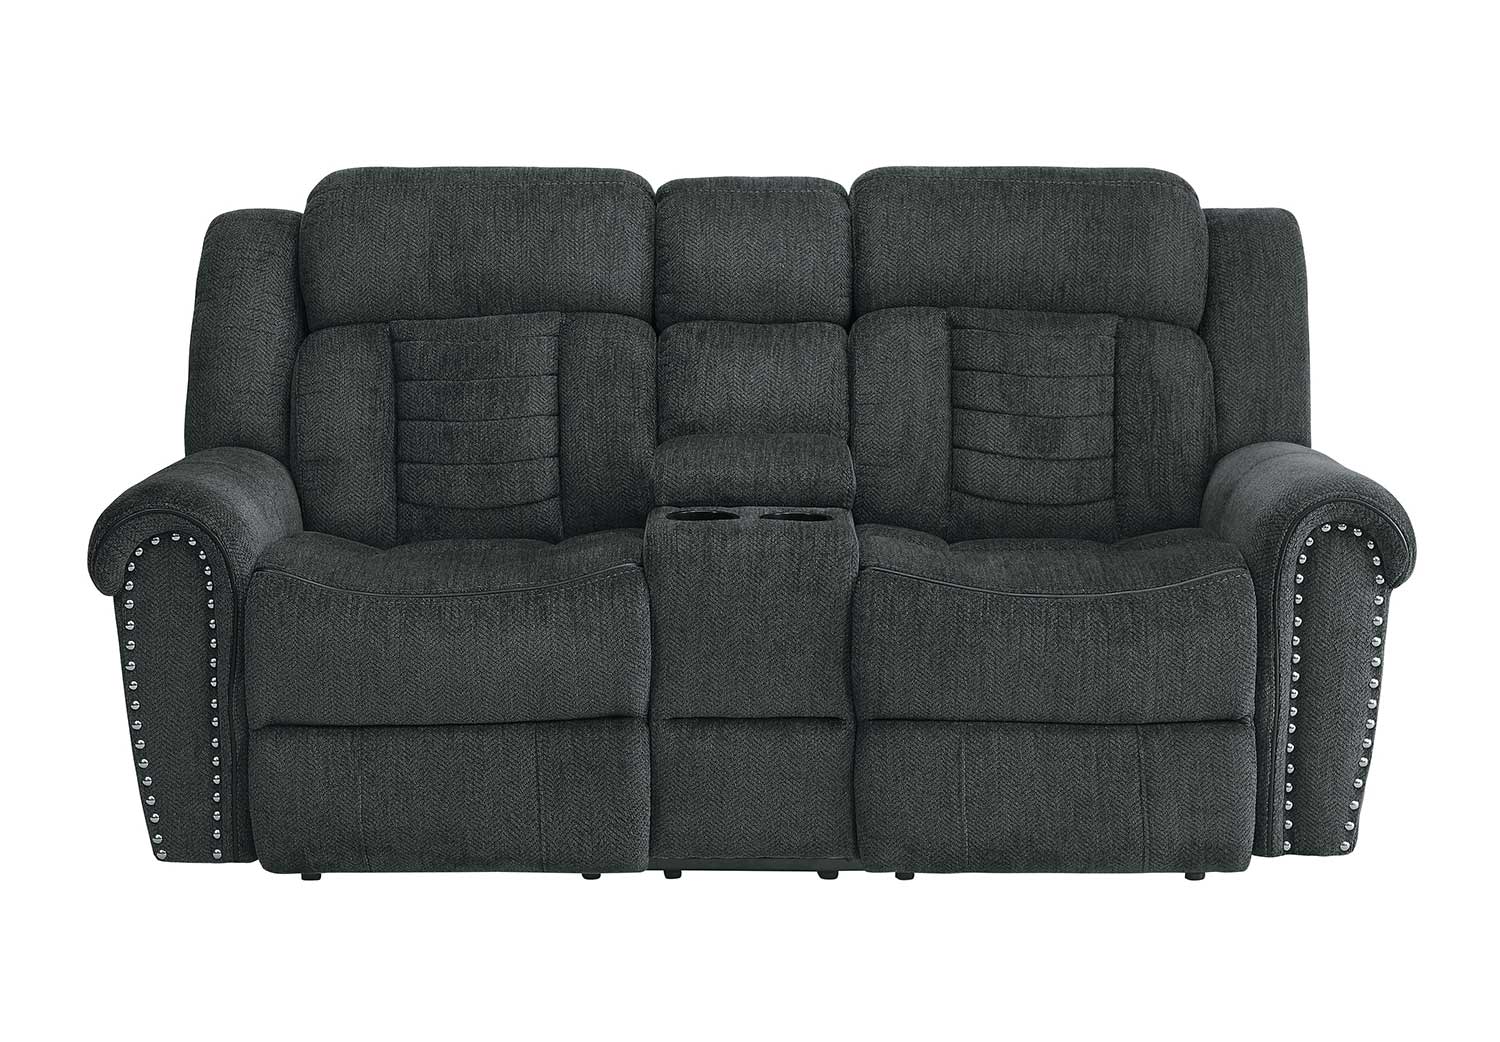 Homelegance Nutmeg Double Reclining Love Seat With Center Console - Charcoal Gray